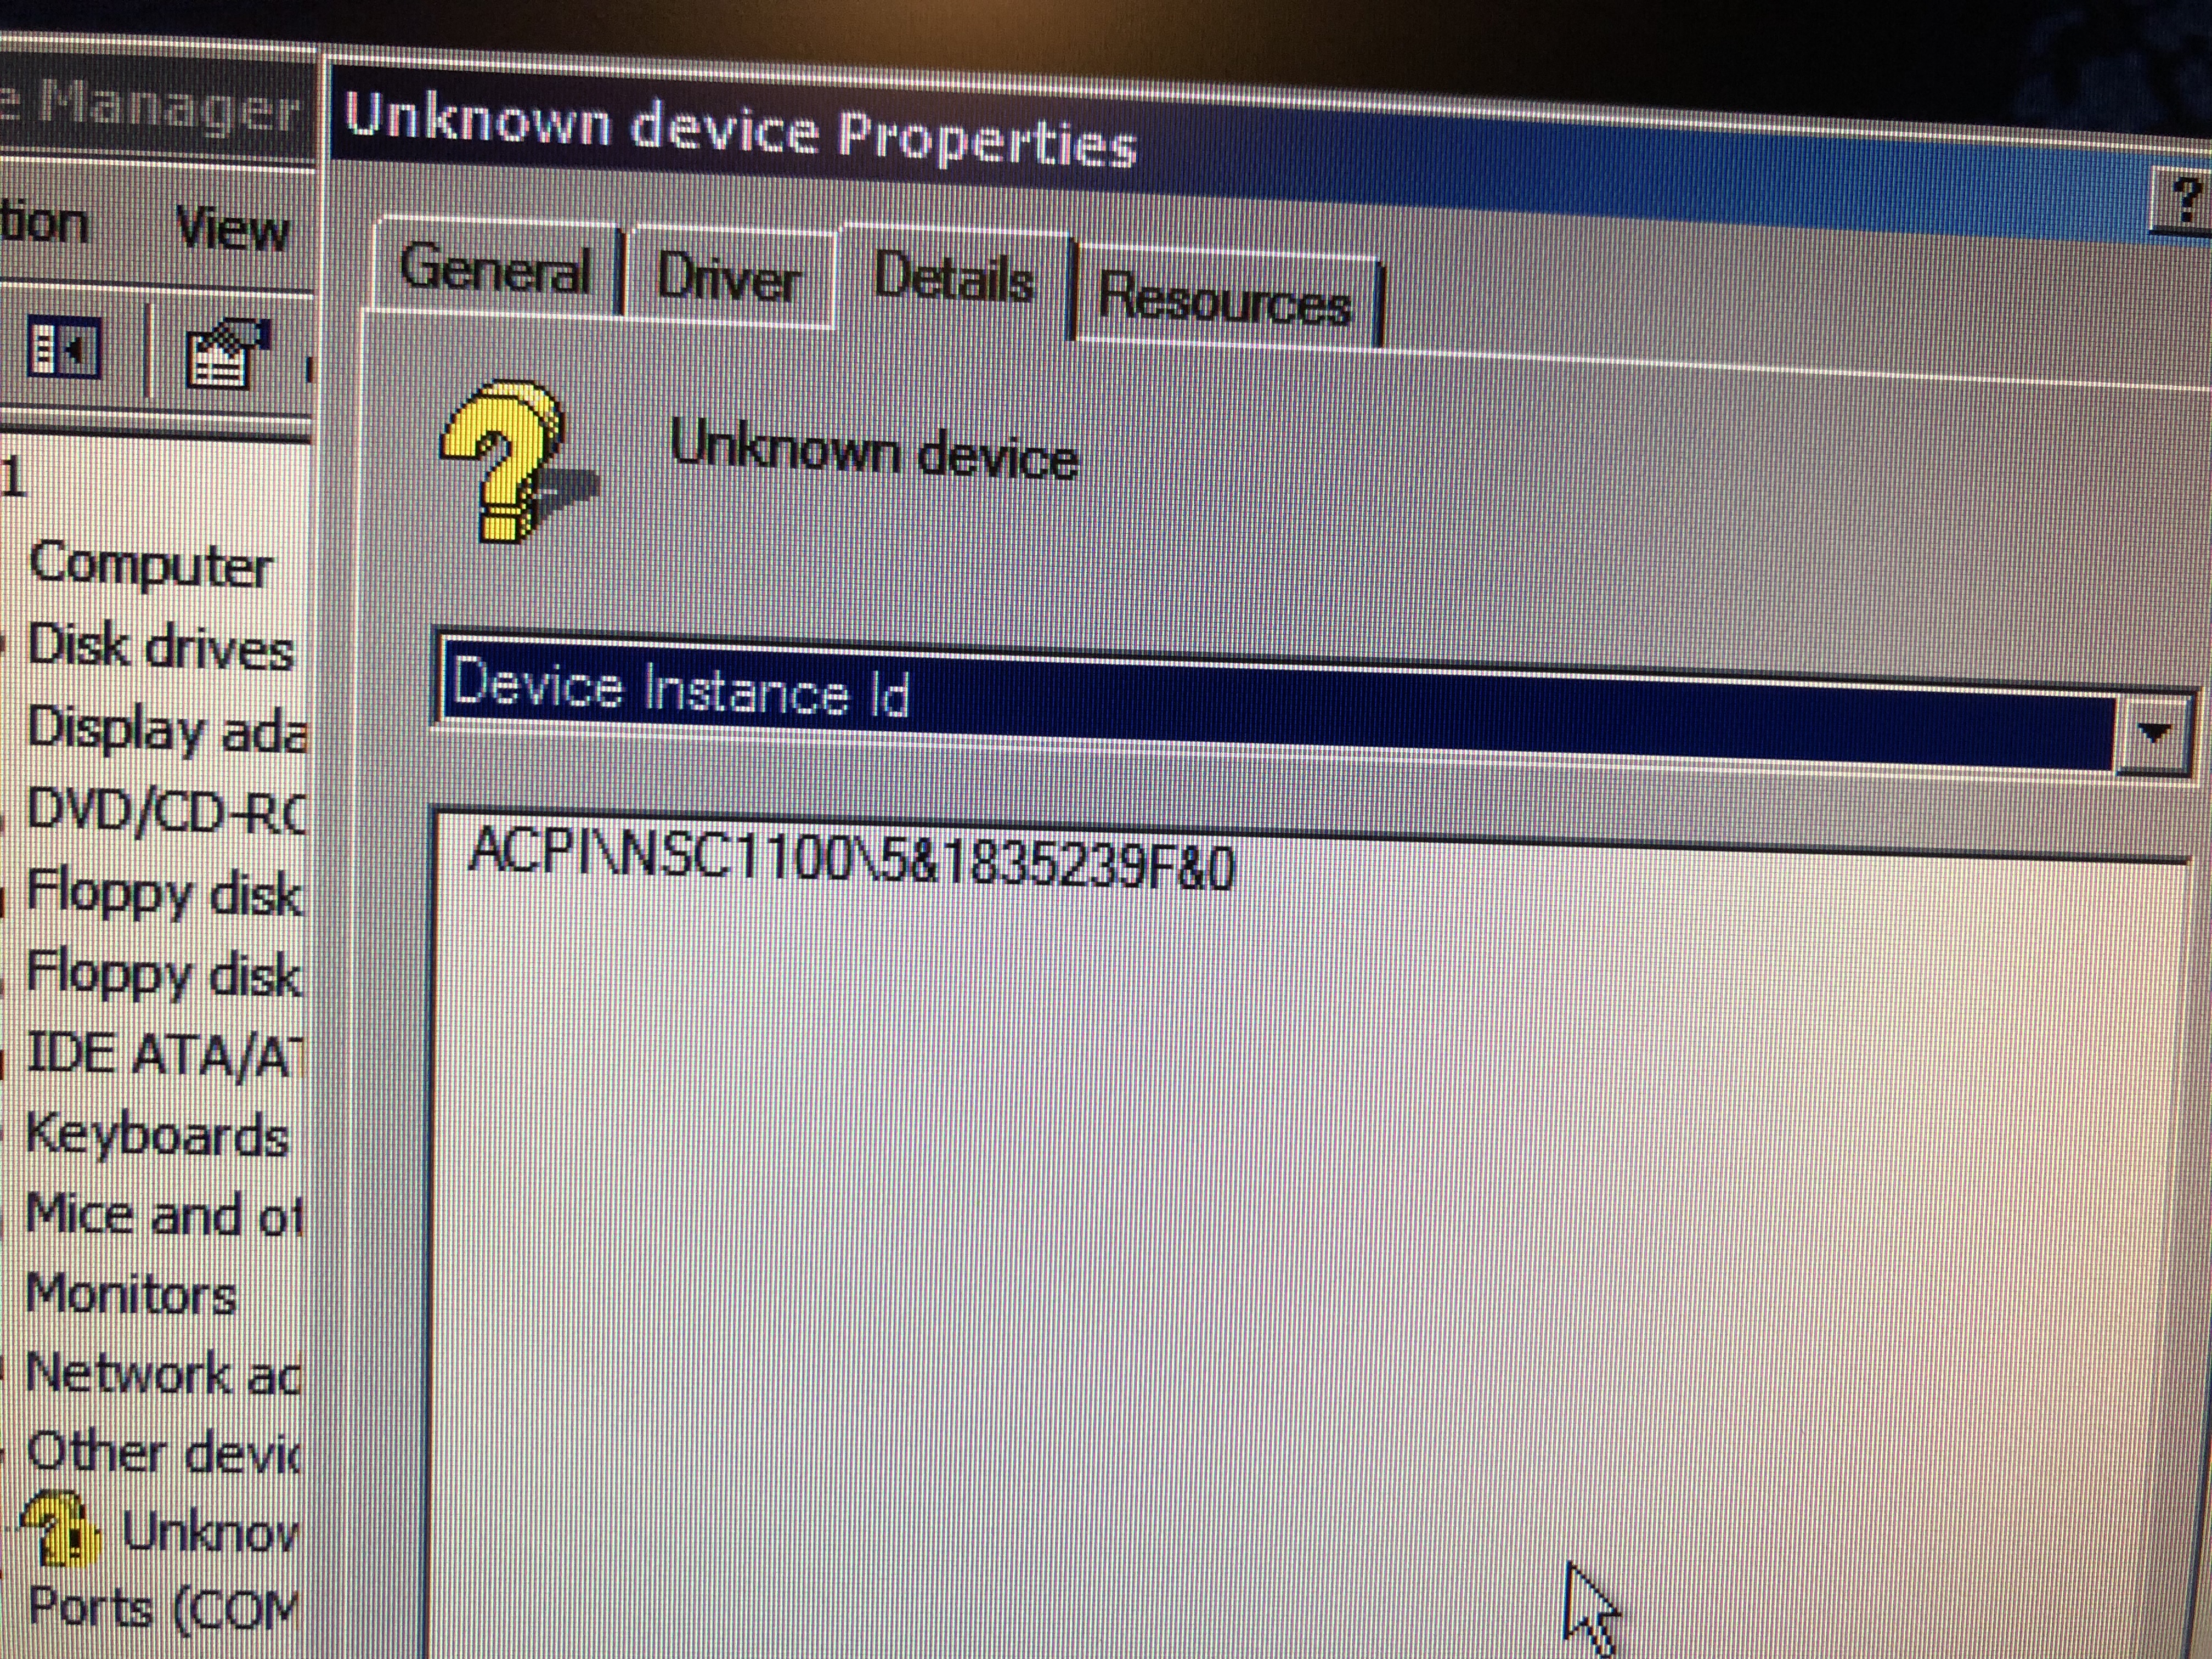 ACPI Device unknown with Questionmark